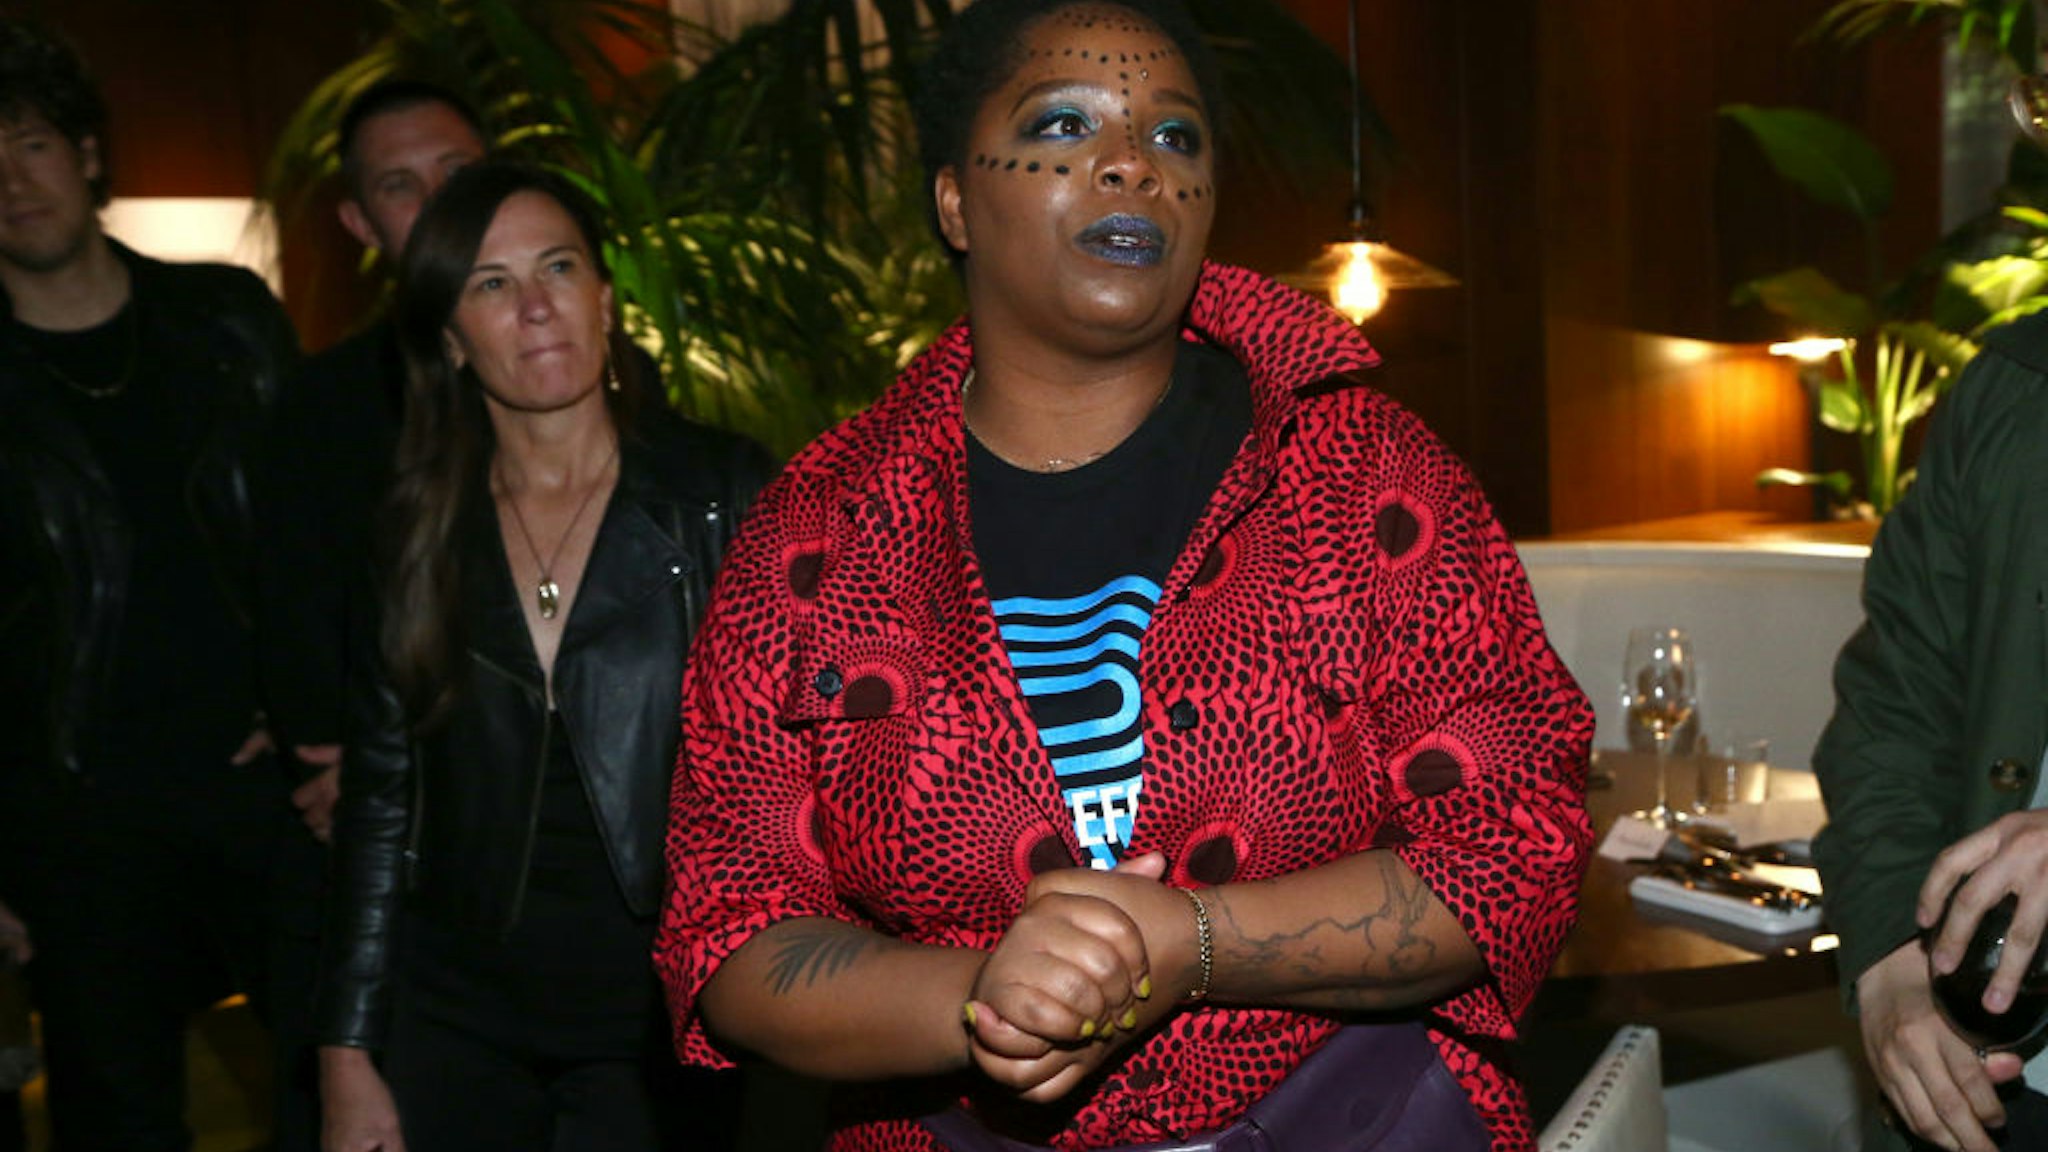 WEST HOLLYWOOD, CALIFORNIA - FEBRUARY 13: Patrisse Cullors attends the Frieze Project Artist Patrisse Cullors x Summit x Cultured Magazine Dinner at The West Hollywood EDITION on February 13, 2020 in West Hollywood, California.